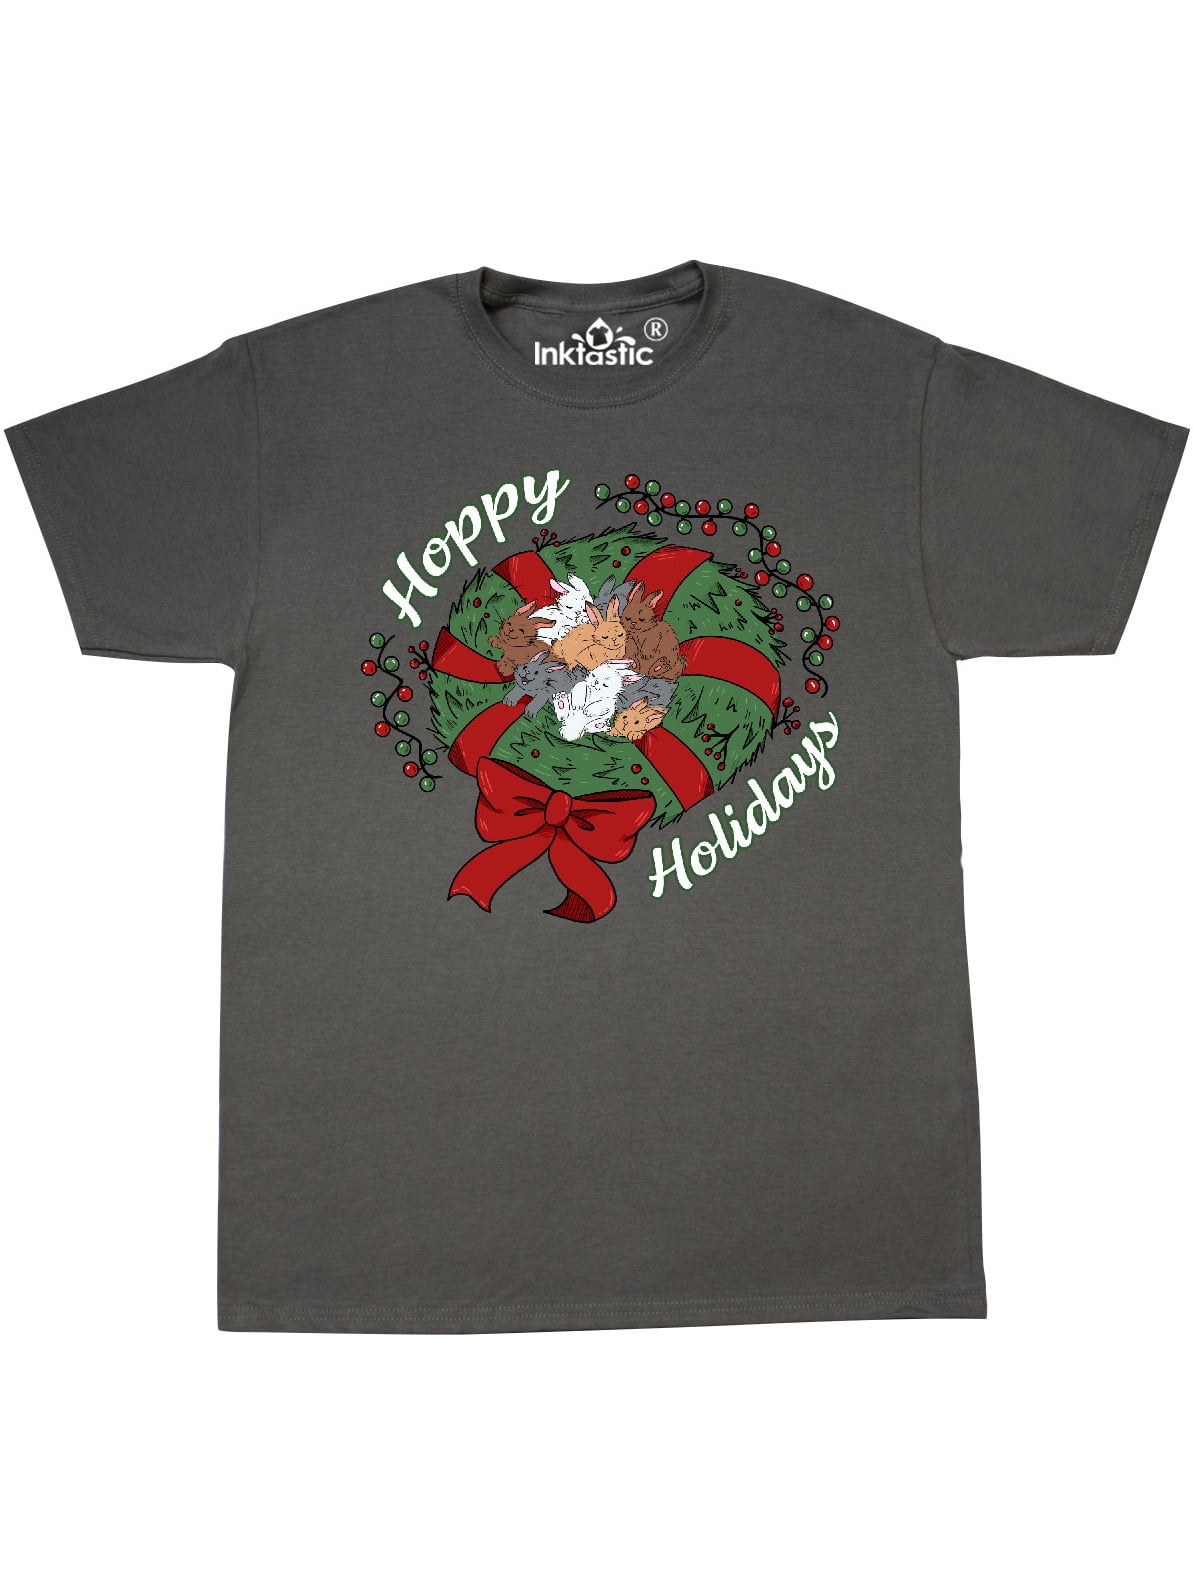 INKtastic - Hoppy Holidays Bunnies in Christmas Wreath with Red Bow T ...